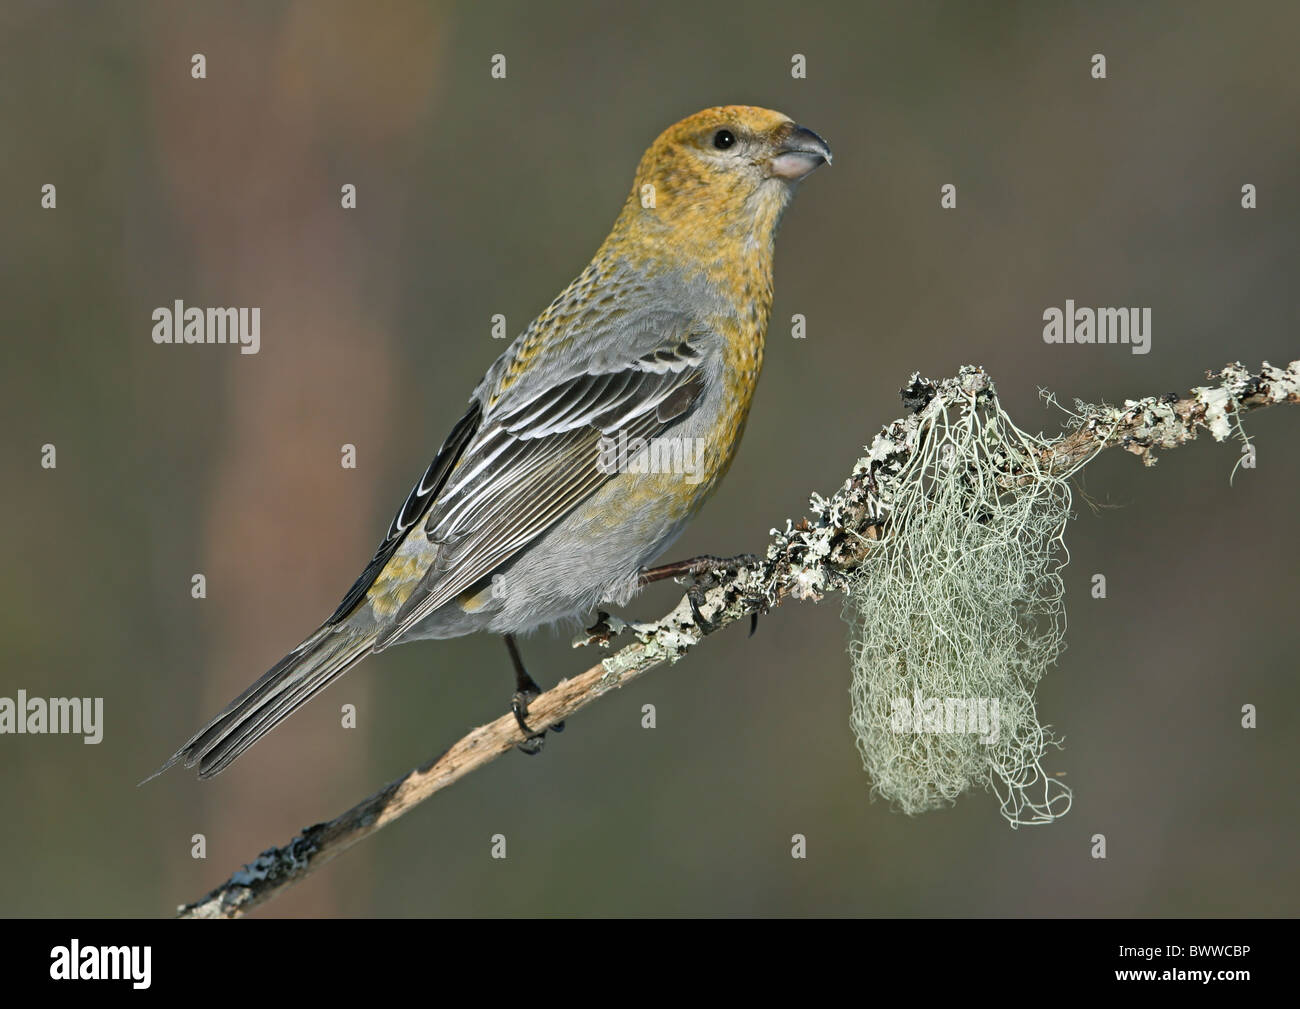 Pine Grosbeak (Pinicola enucleator) adult female, perched on lichen covered twig, Lapland, Finland Stock Photo